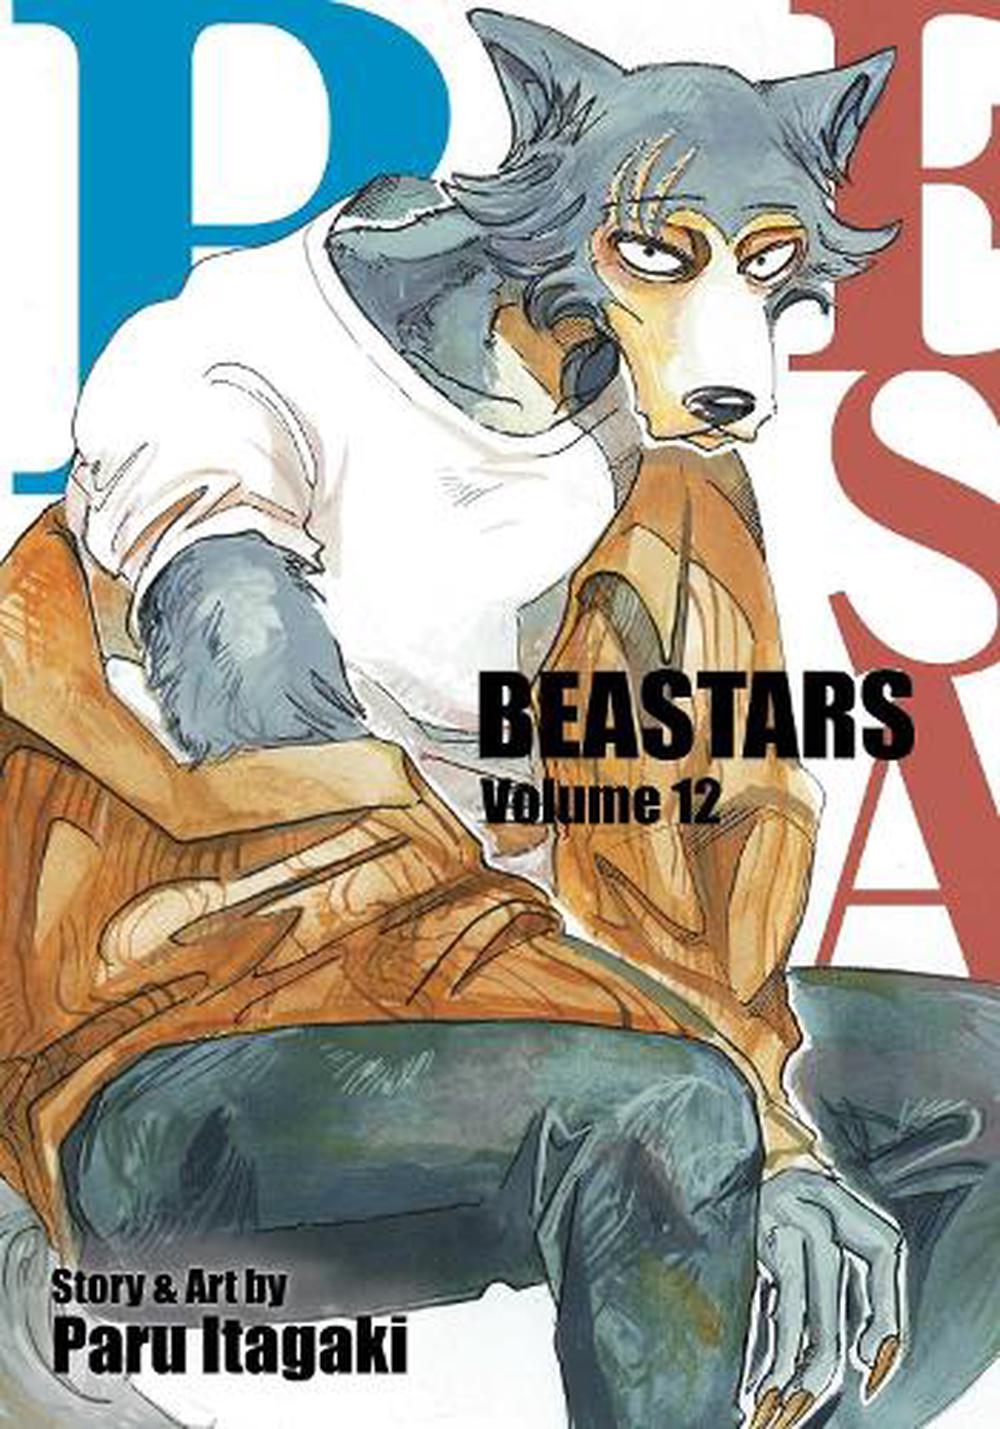 Beastars Vol 12 By Paru Itagaki Paperback Buy Online At The Nile